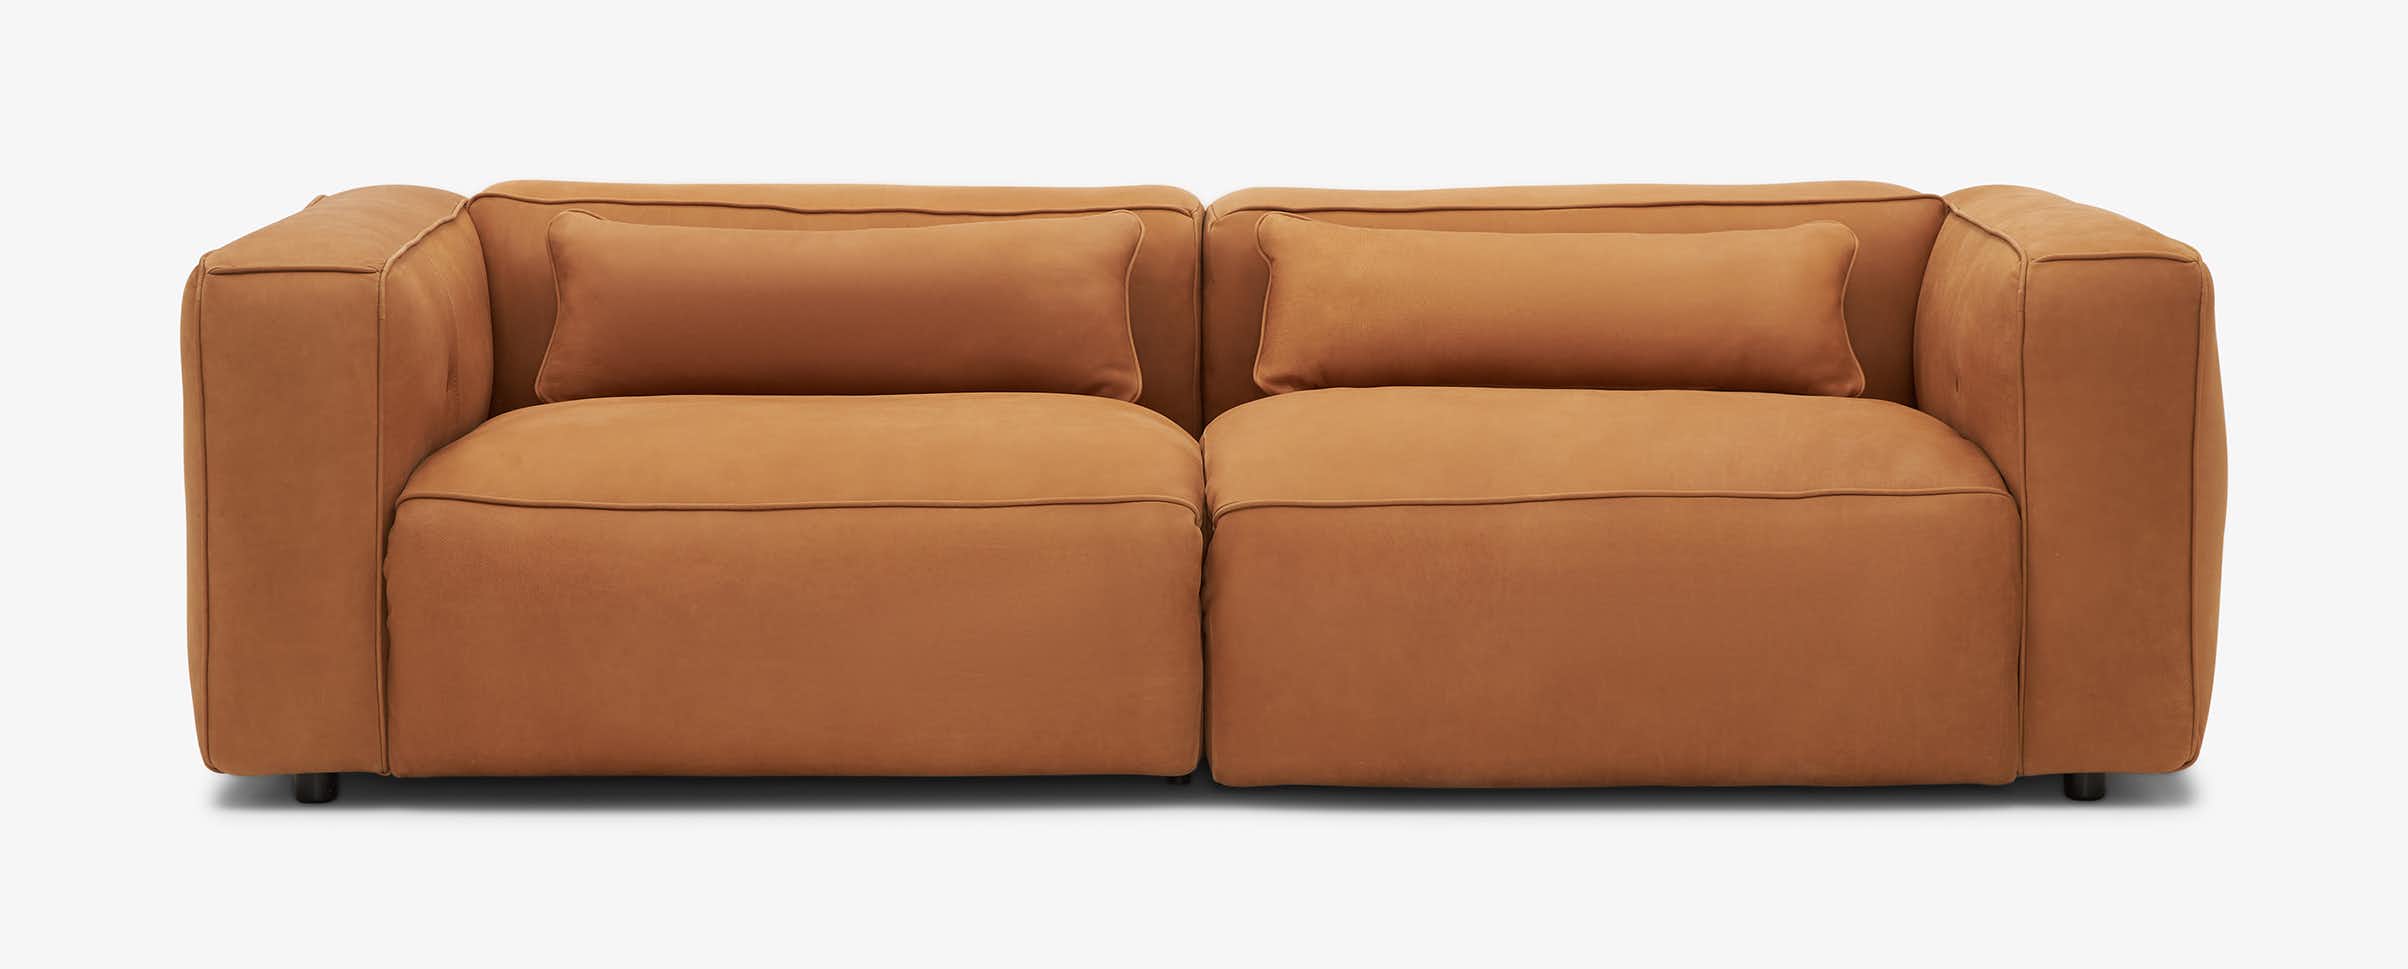 Brock Leather Convertible Sofa Daybed